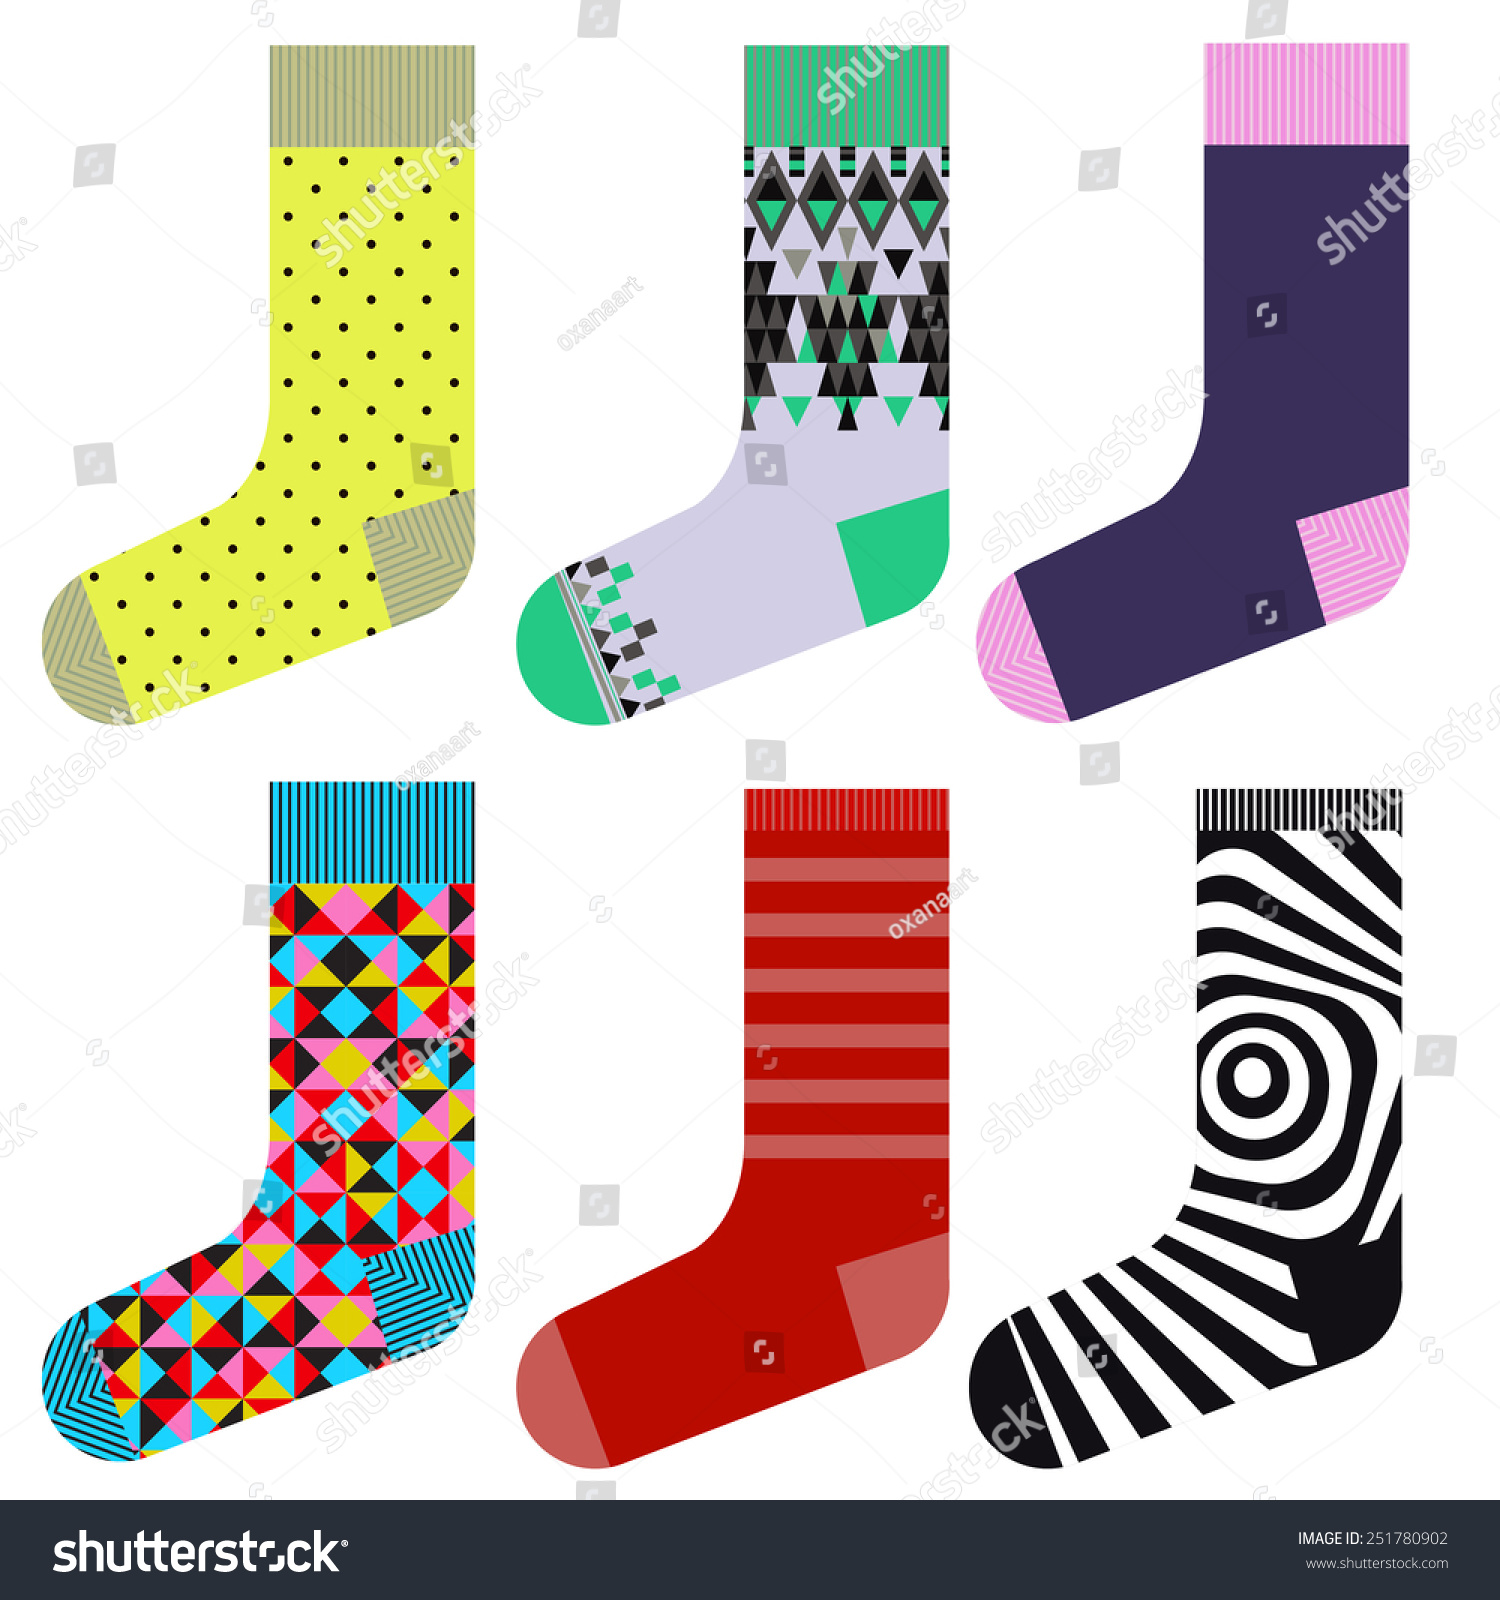 Socks Design Set Colorful Collection Stock Vector (Royalty Free) 251780902